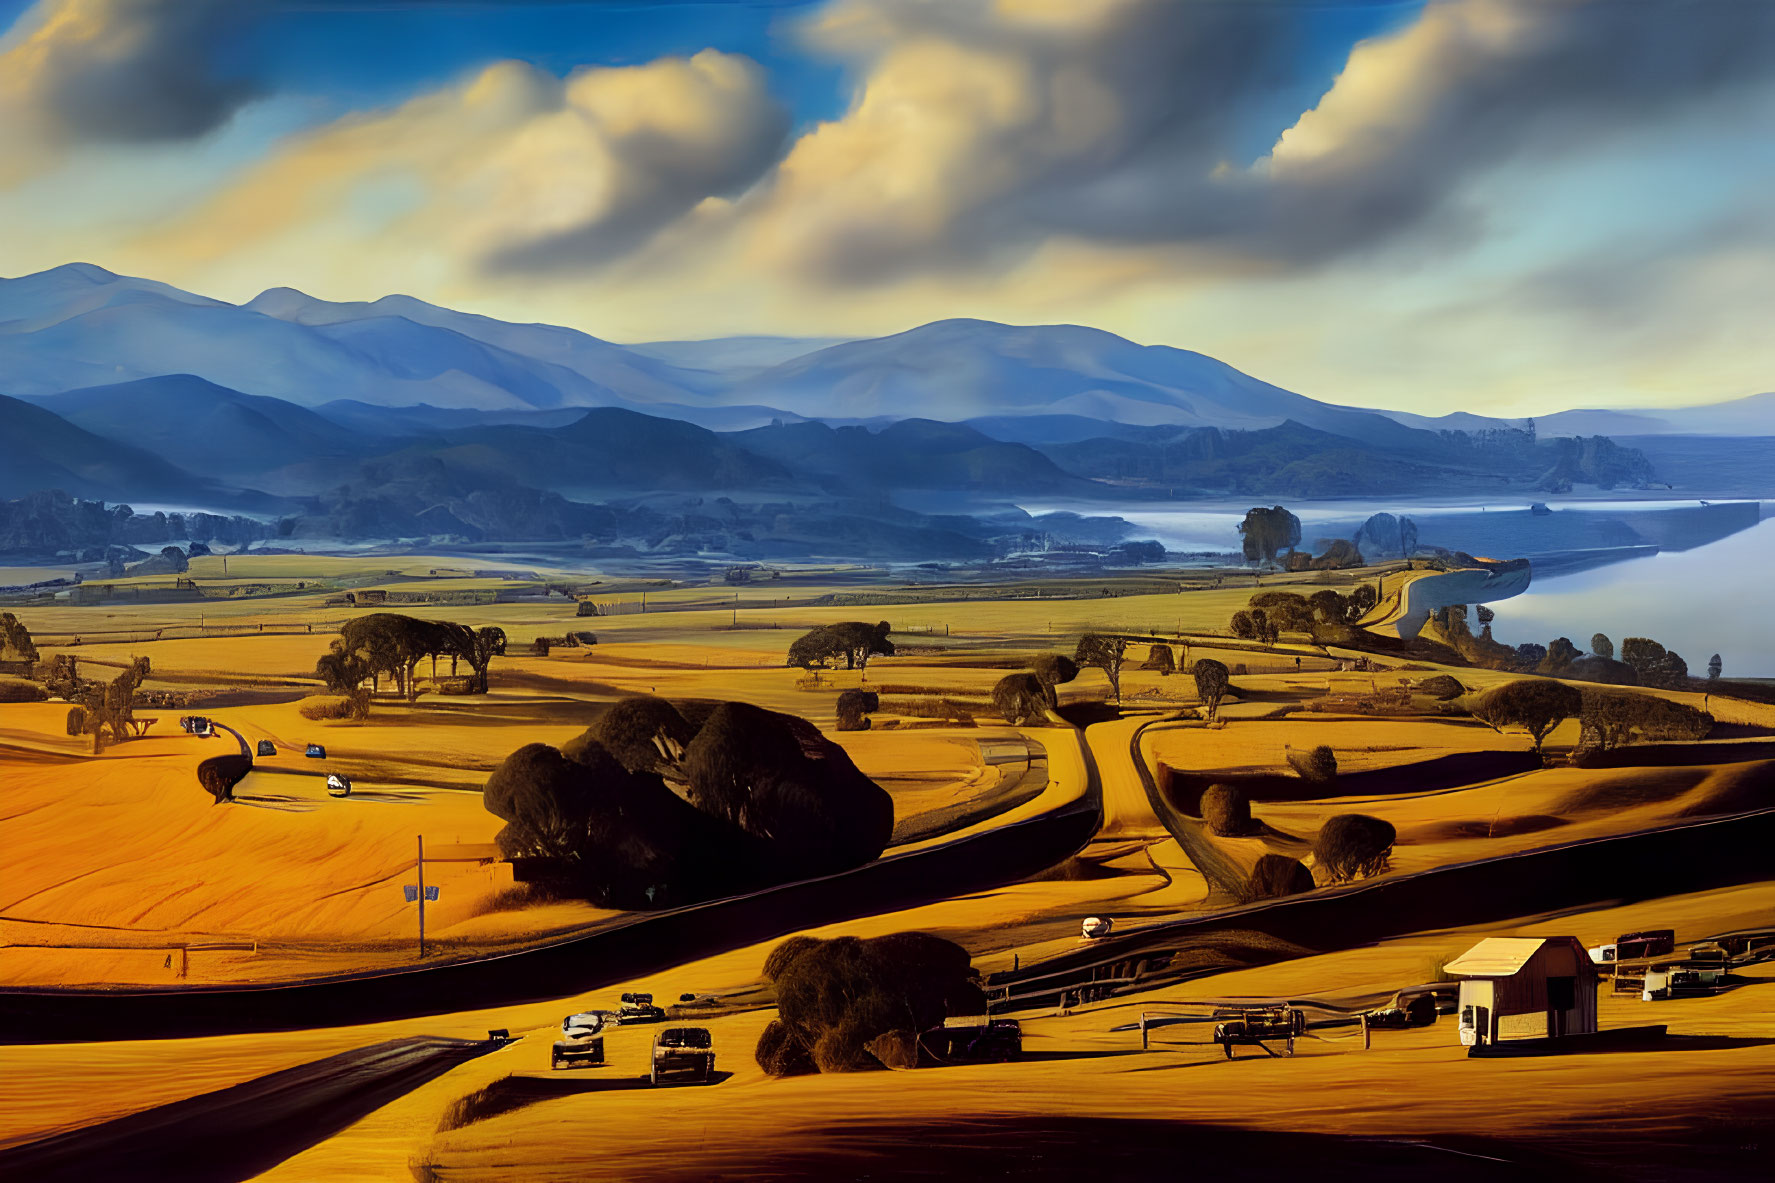 Scenic landscape with winding roads, trees, cars, structures, lake, mountains, and blue skies